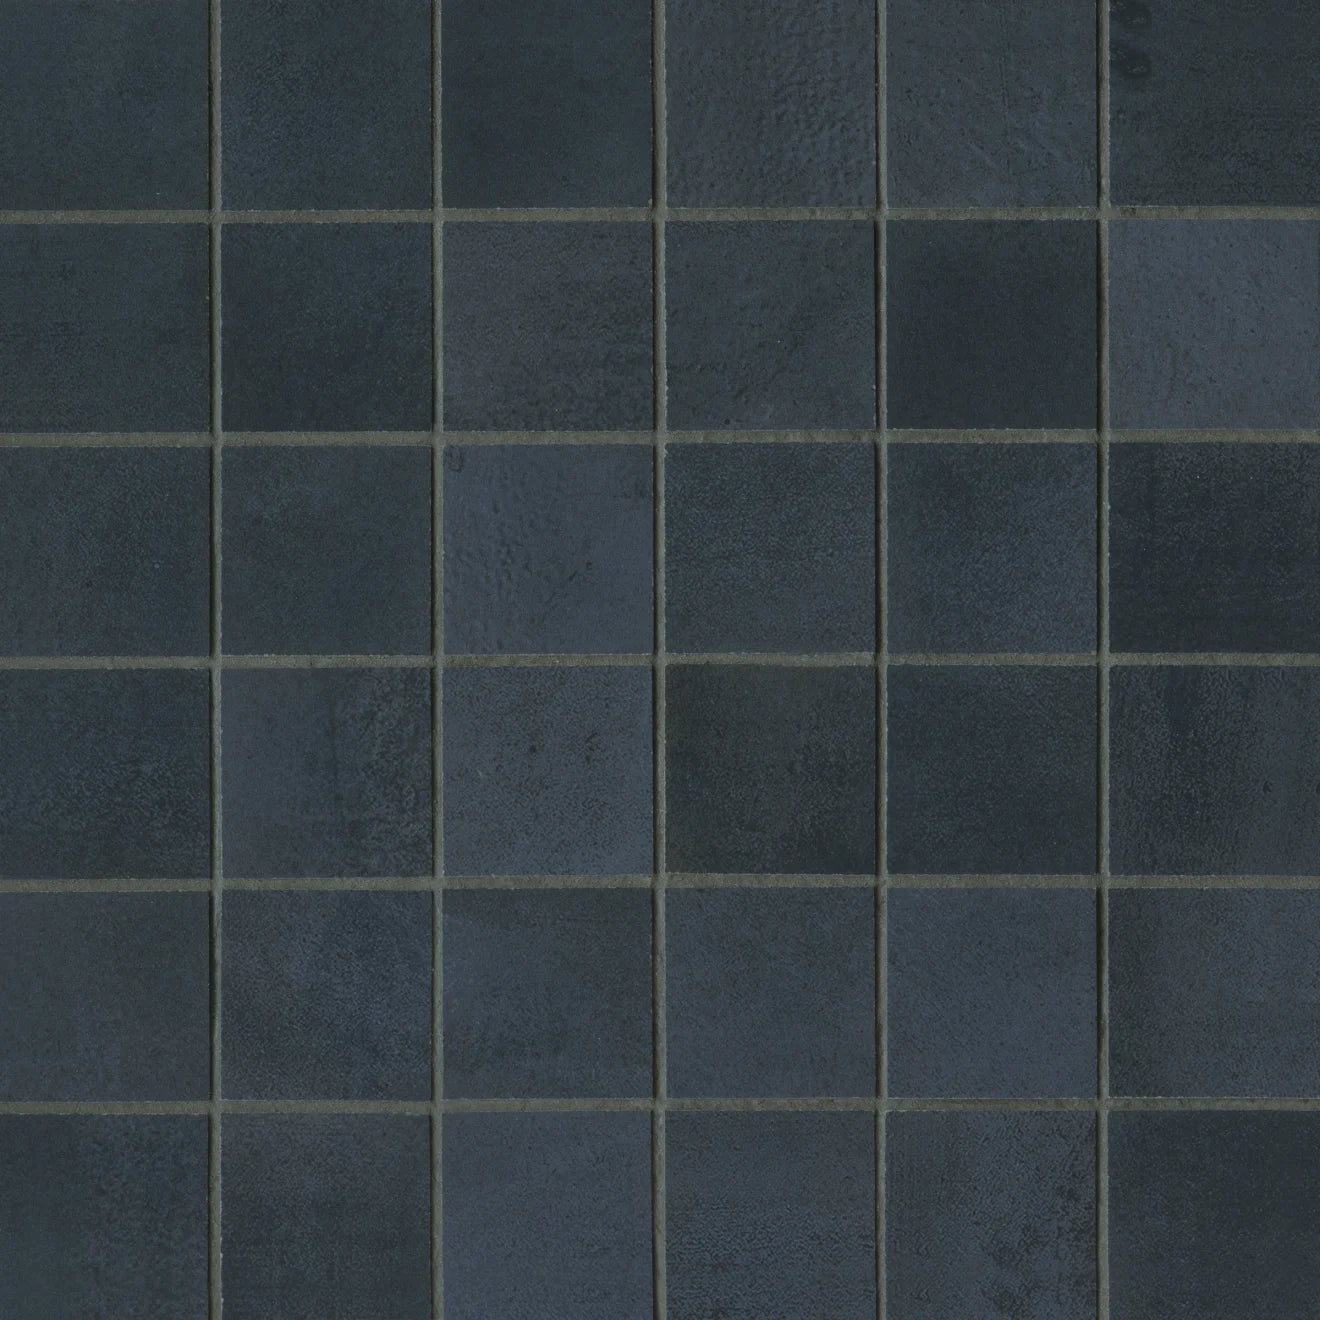 Chateau Square Floor & Wall Mosaic Tile